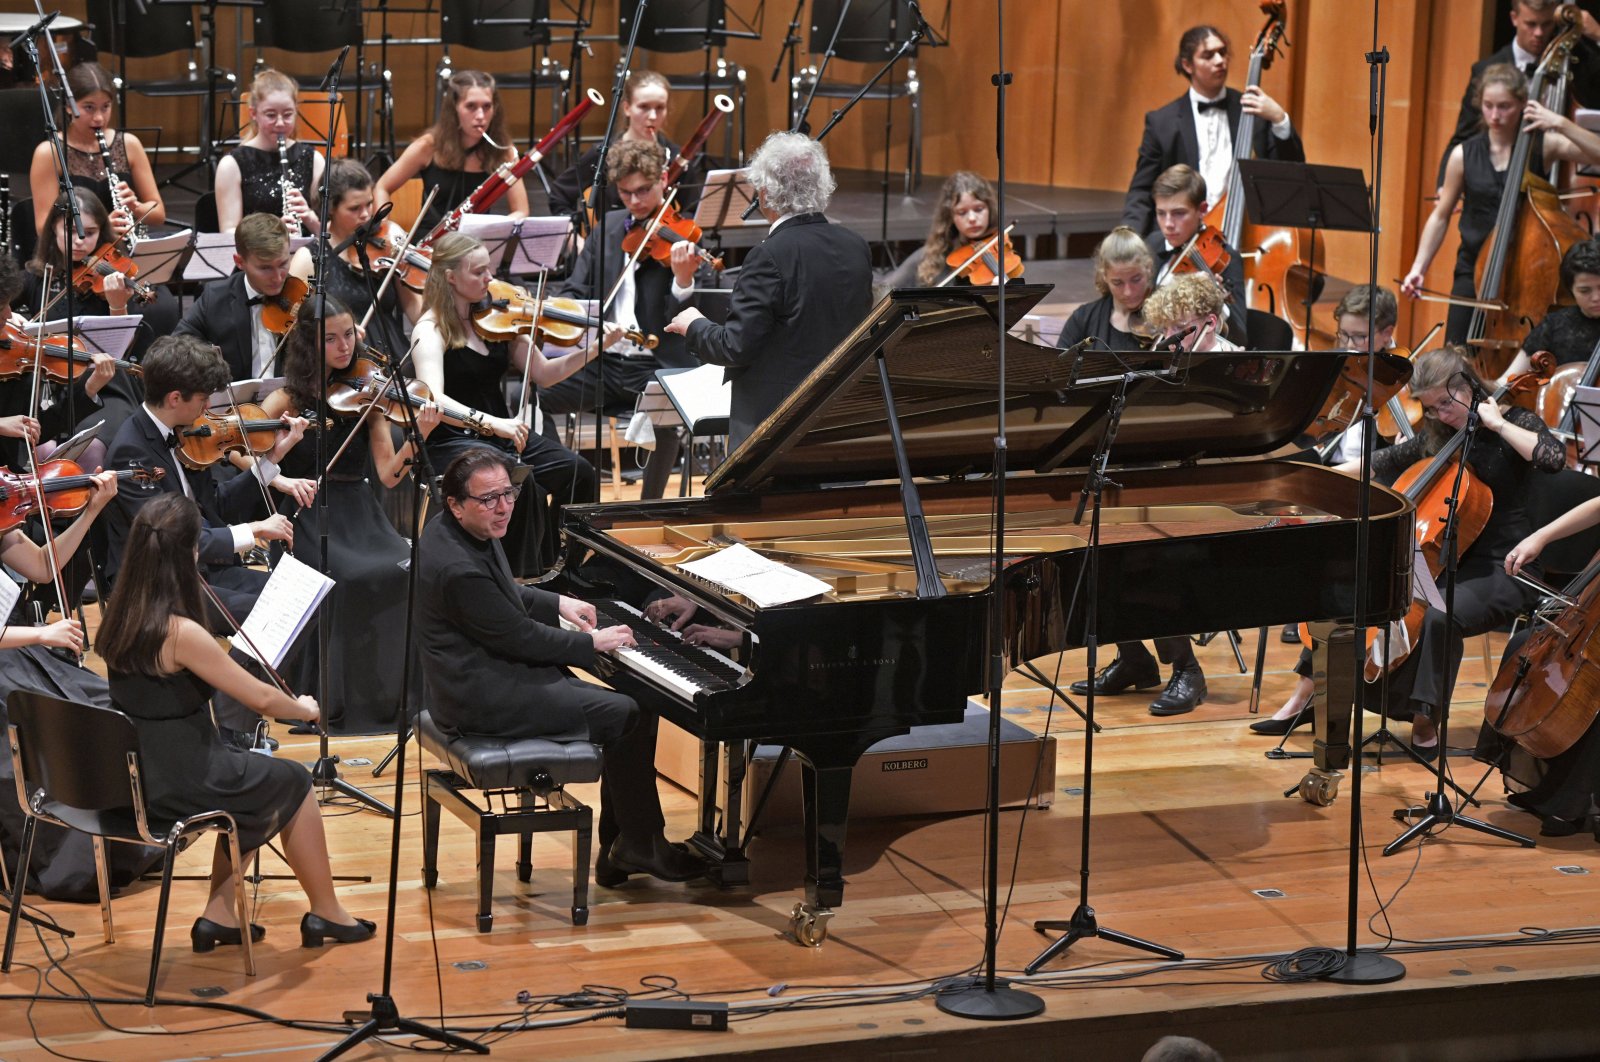 Orchestra accompanies Turkish pianist Fazıl Say on the piano, Sept. 25, 2021. (Reuters File Photo)